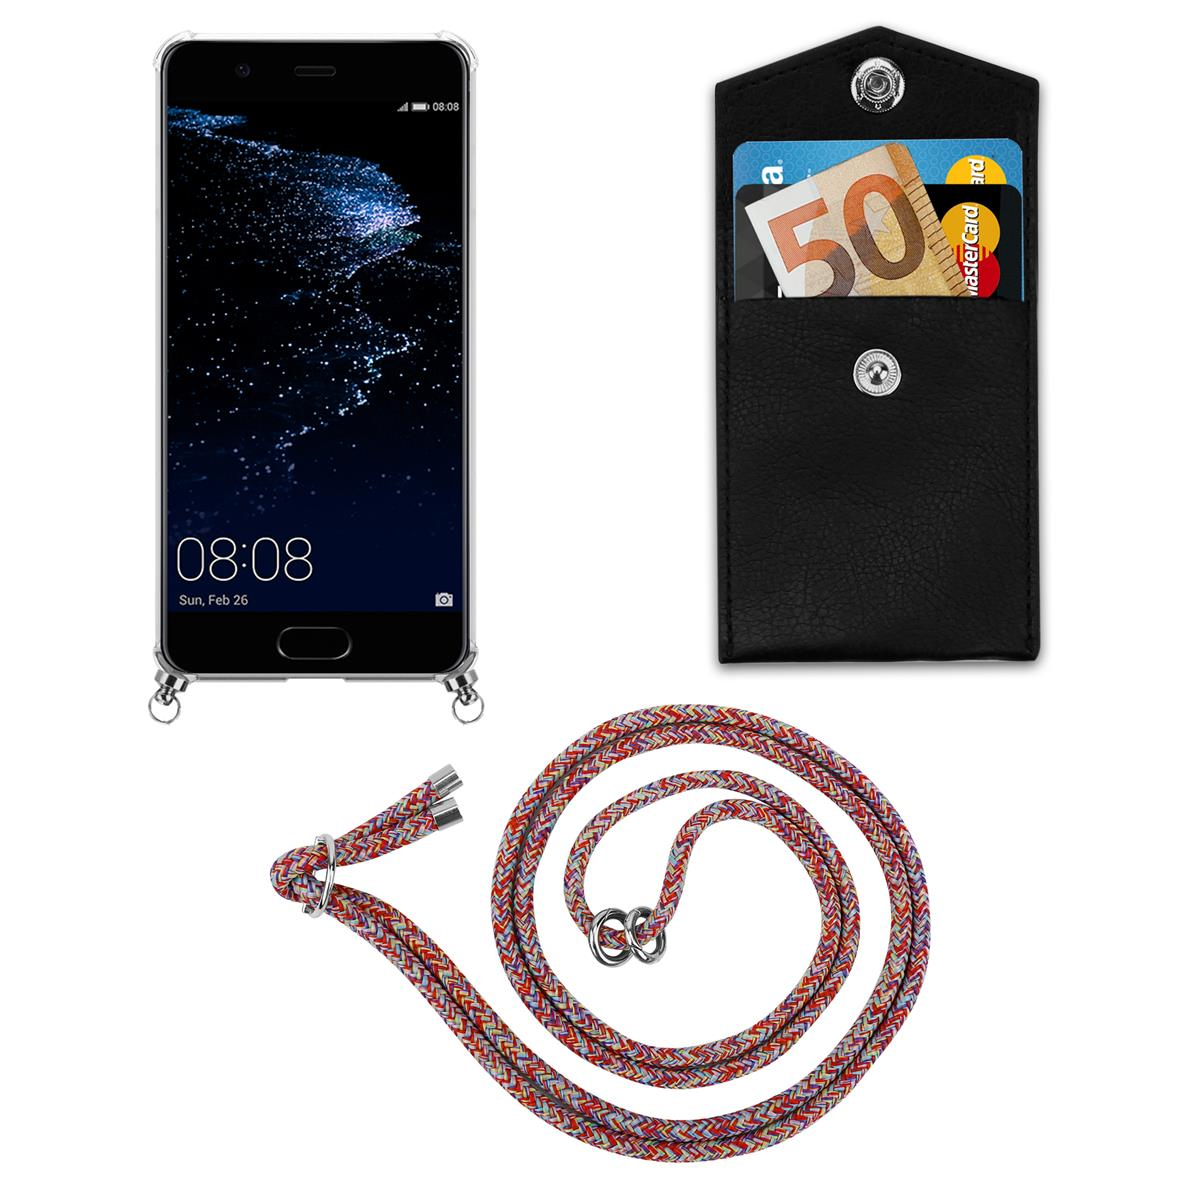 Handy Kordel Huawei, Band Backcover, Hülle, Silber PARROT mit abnehmbarer P10 COLORFUL CADORABO Ringen, Kette PLUS, und